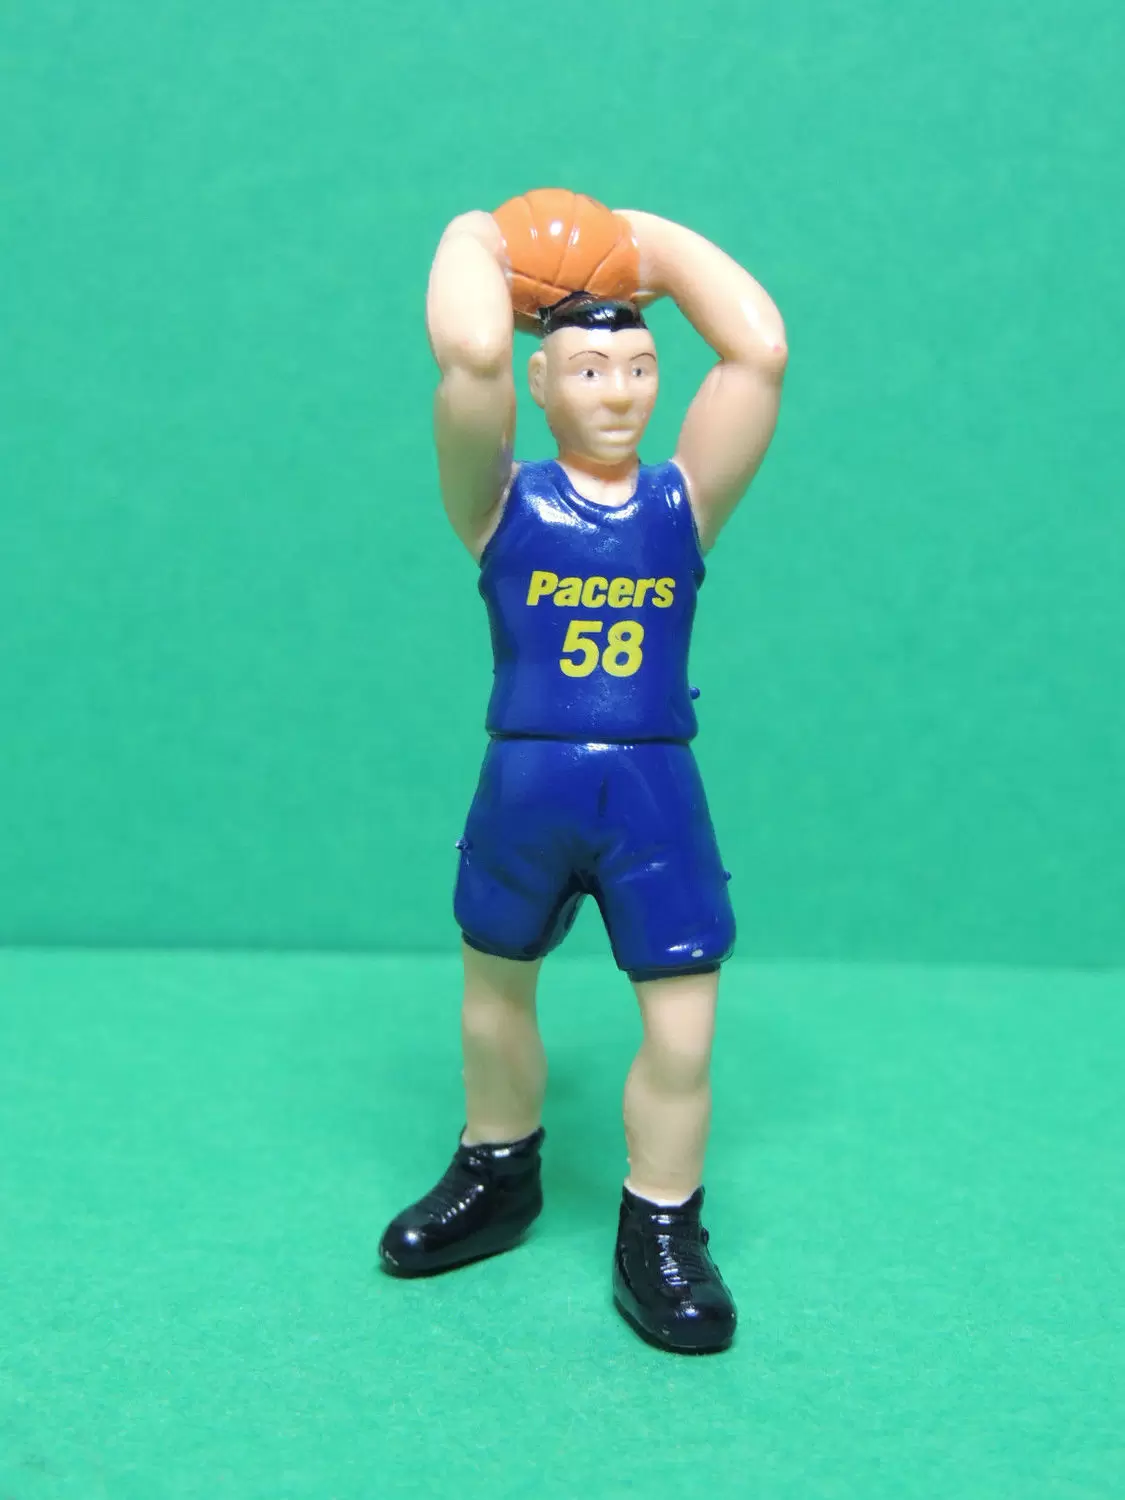 NBA - Pacers 58